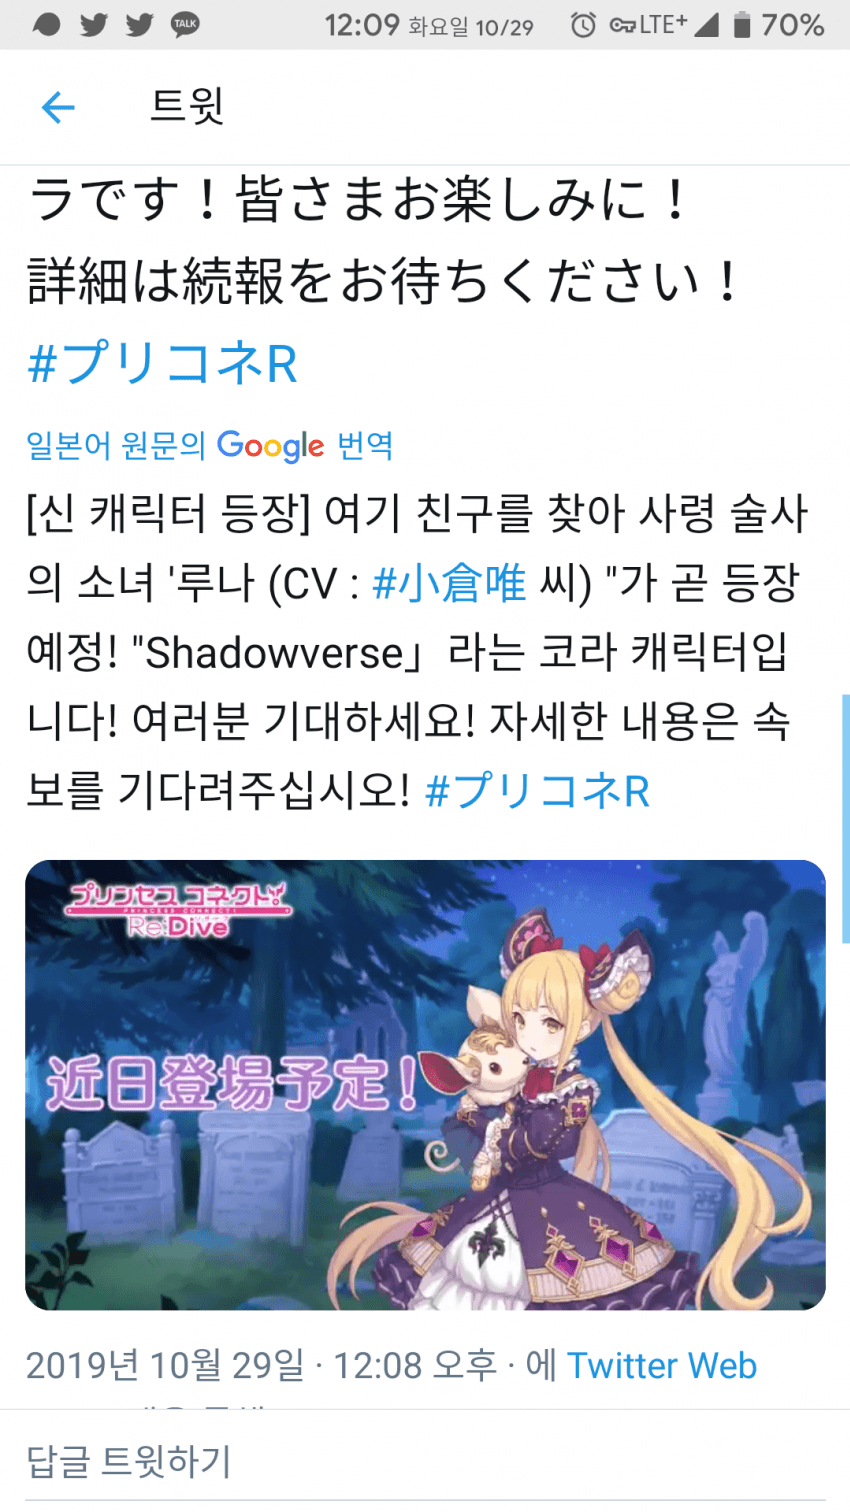 shadowverse-20191029-125643-001-resize.png